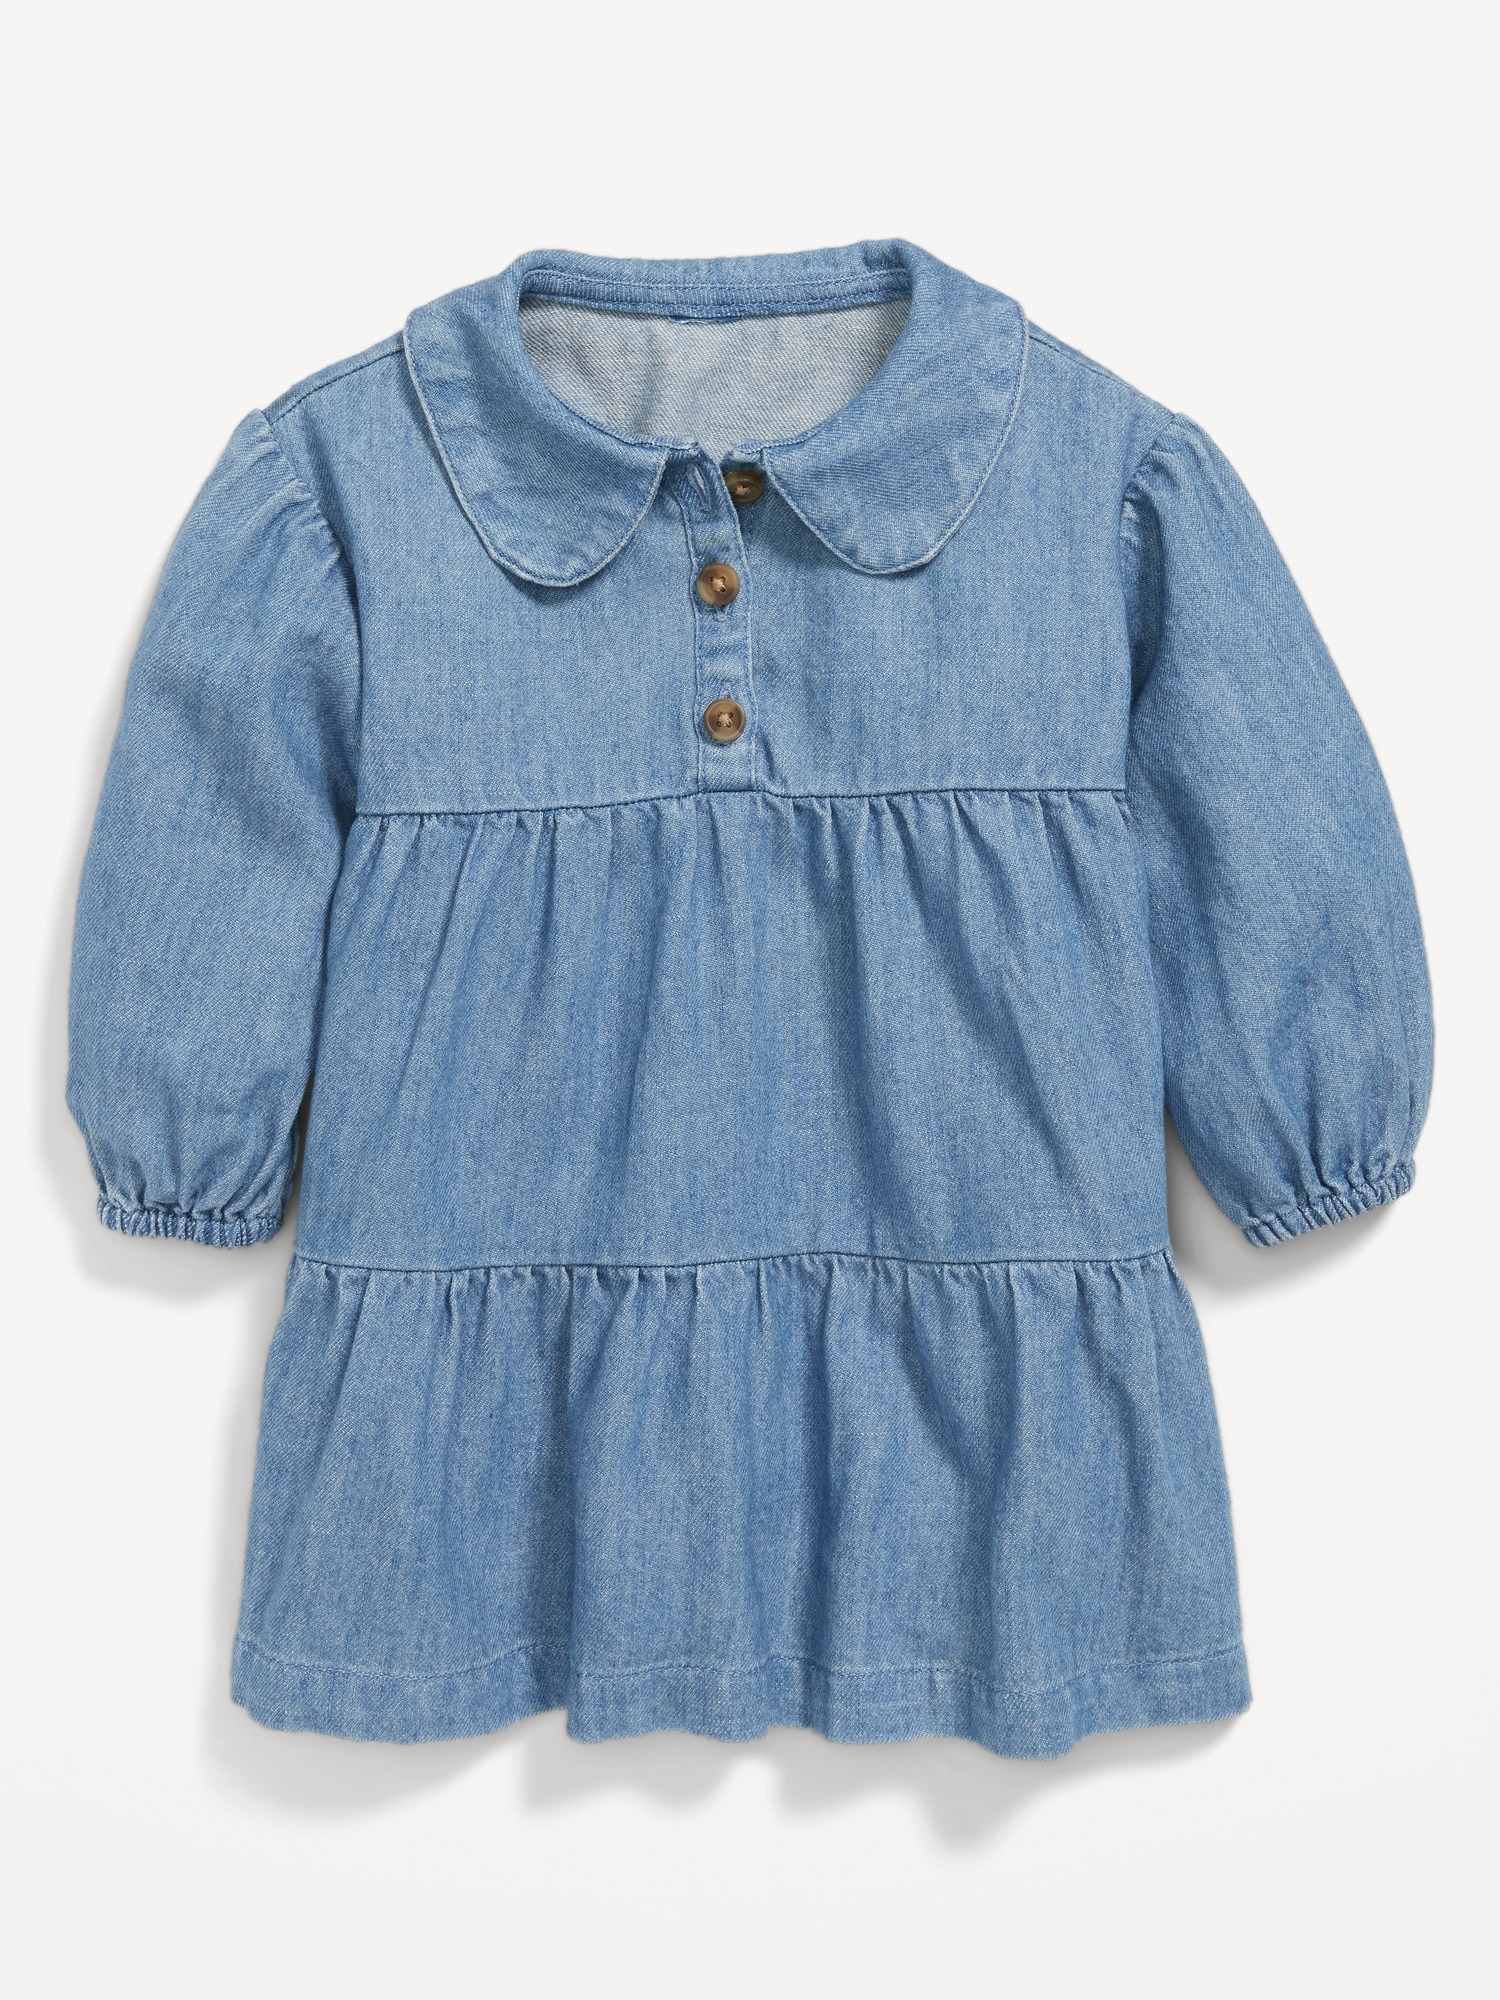 Long-Sleeve Button-Front Chambray Tiered Dress for Baby | Old Navy